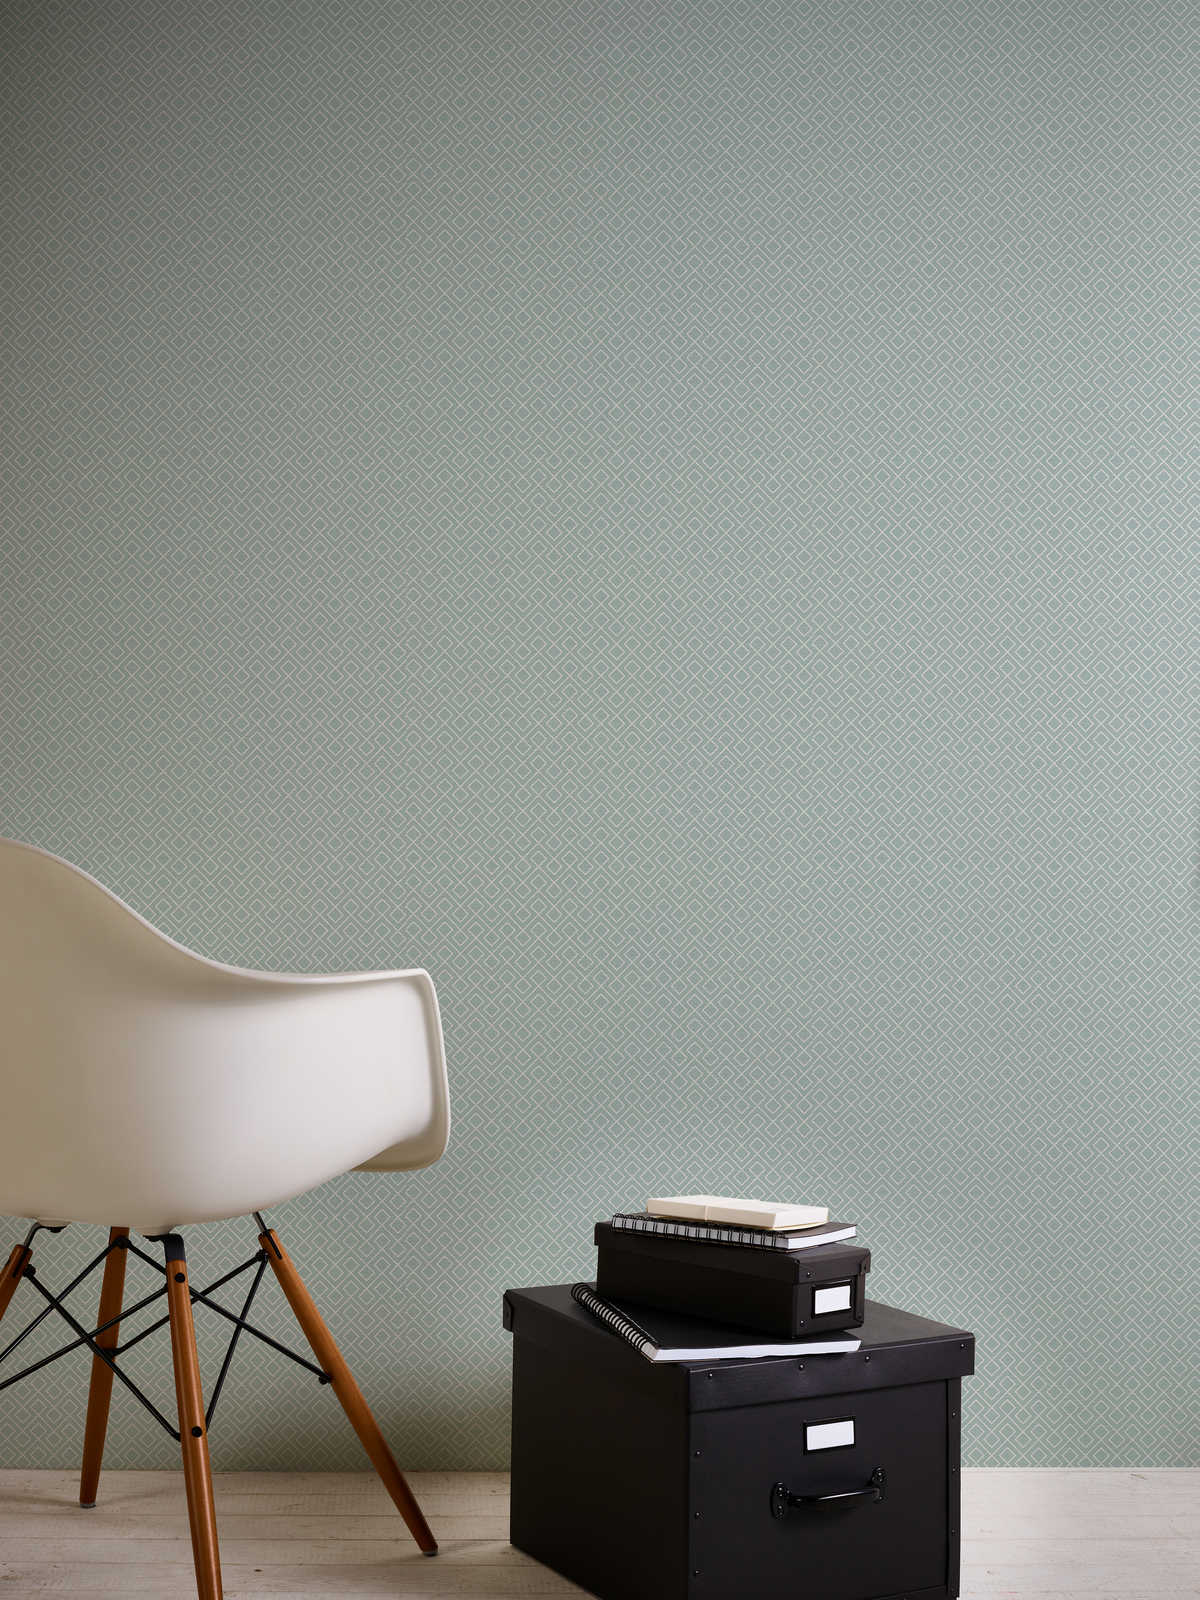             Non-woven wallpaper with graphic pattern in Scandi style - blue
        